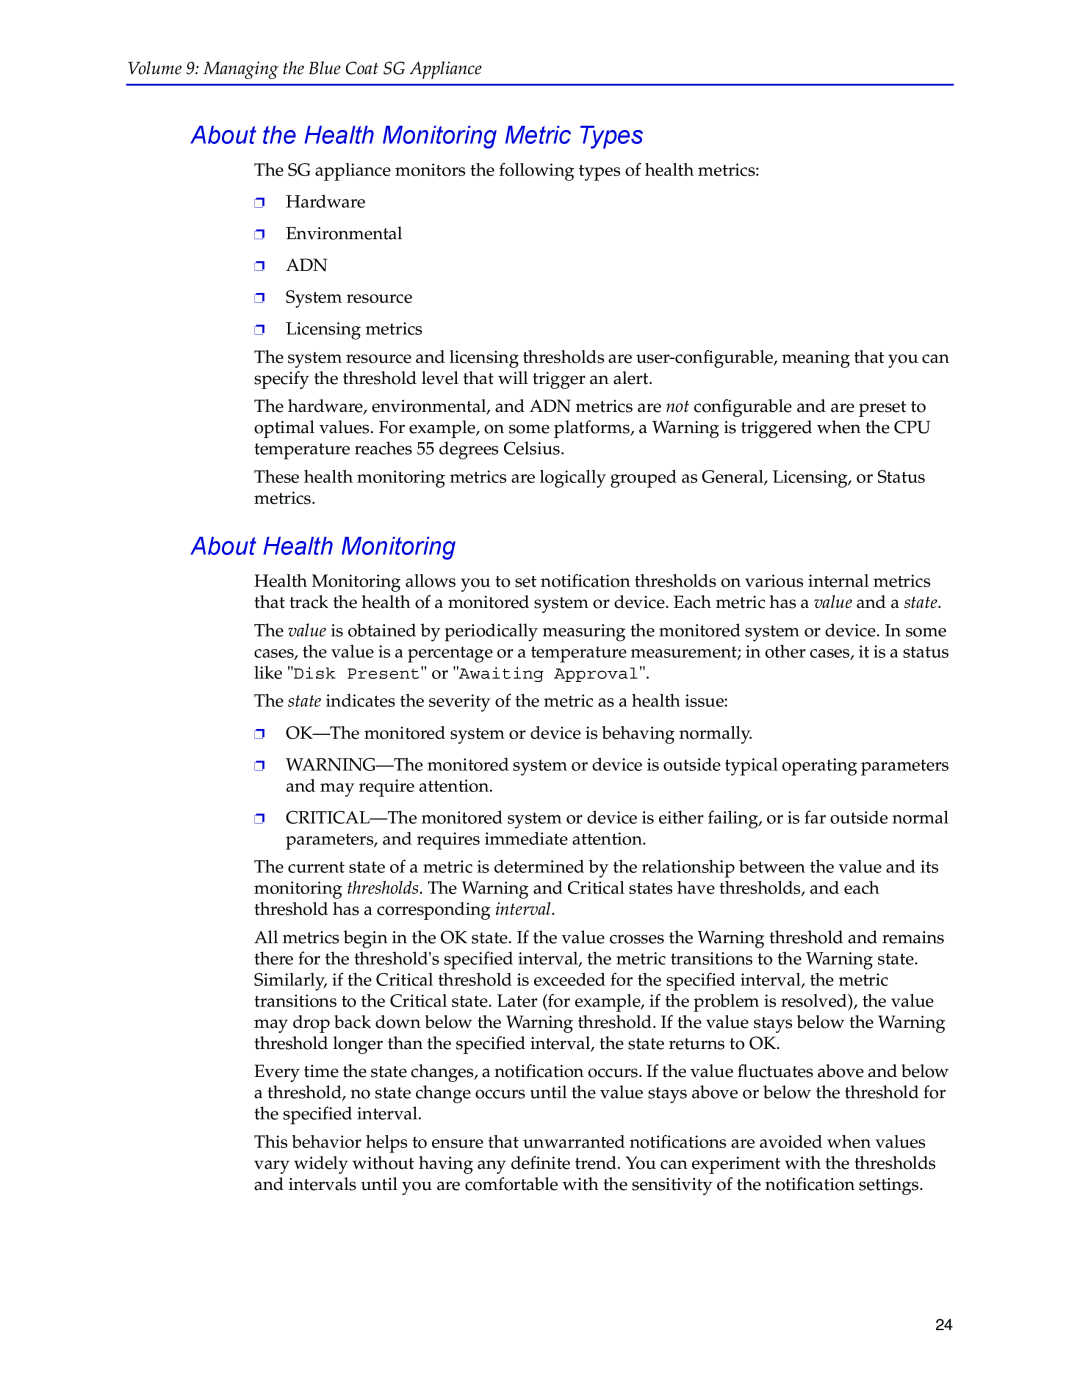 Blue Coat Systems SGOS Version 5.2.2 manual About the Health Monitoring Metric Types, About Health Monitoring 